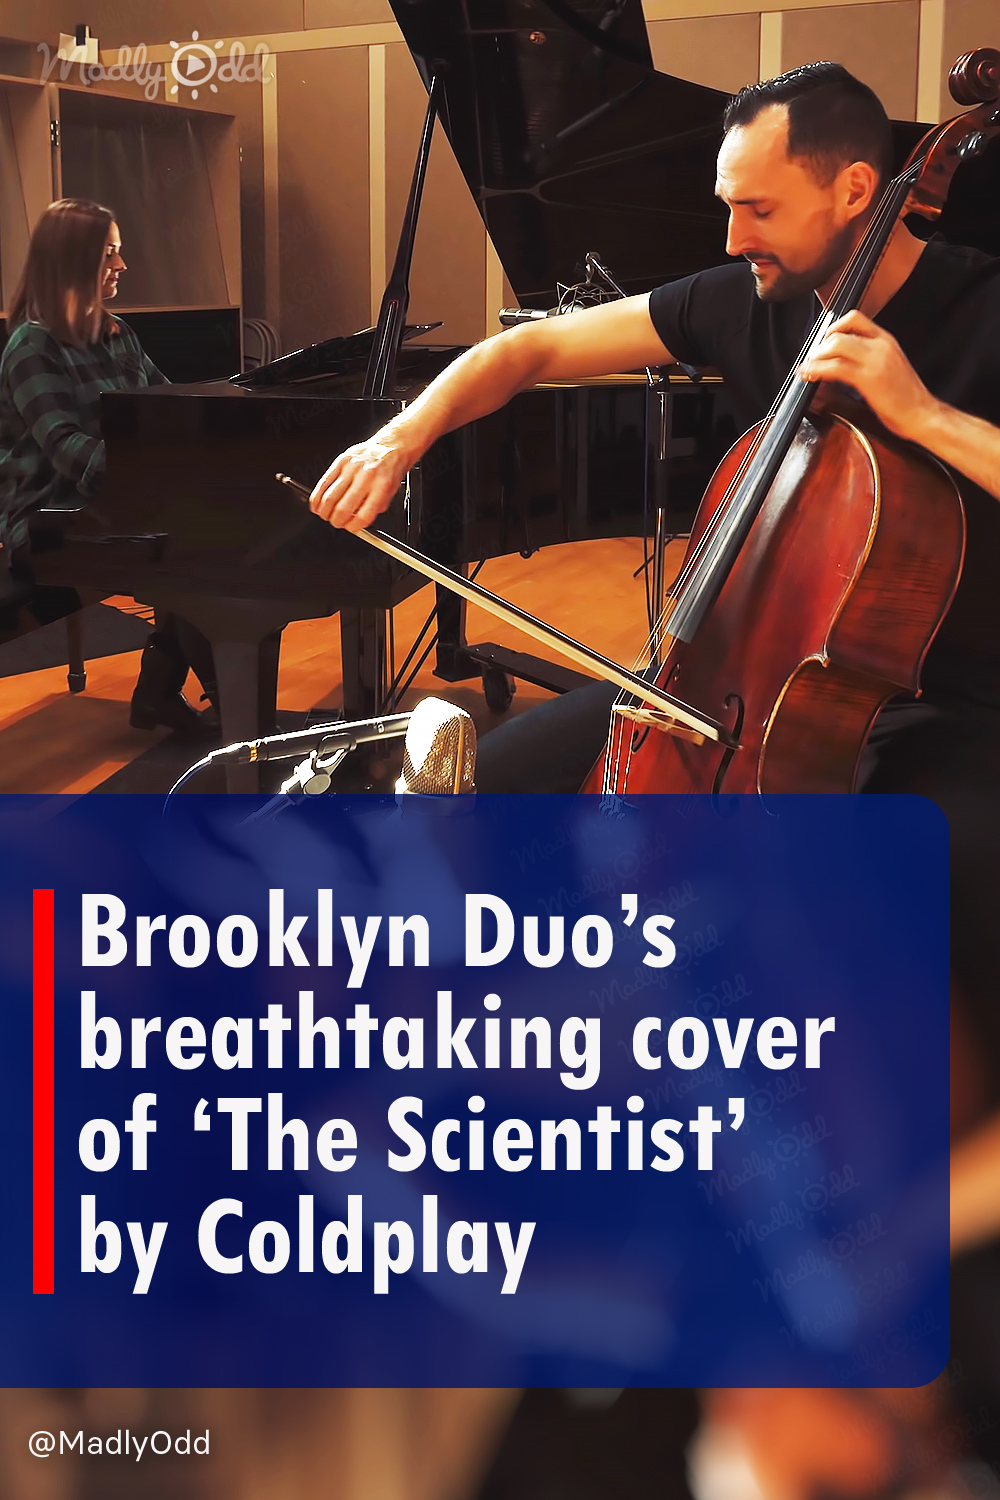 Brooklyn Duo’s breathtaking cover of ‘The Scientist’ by Coldplay